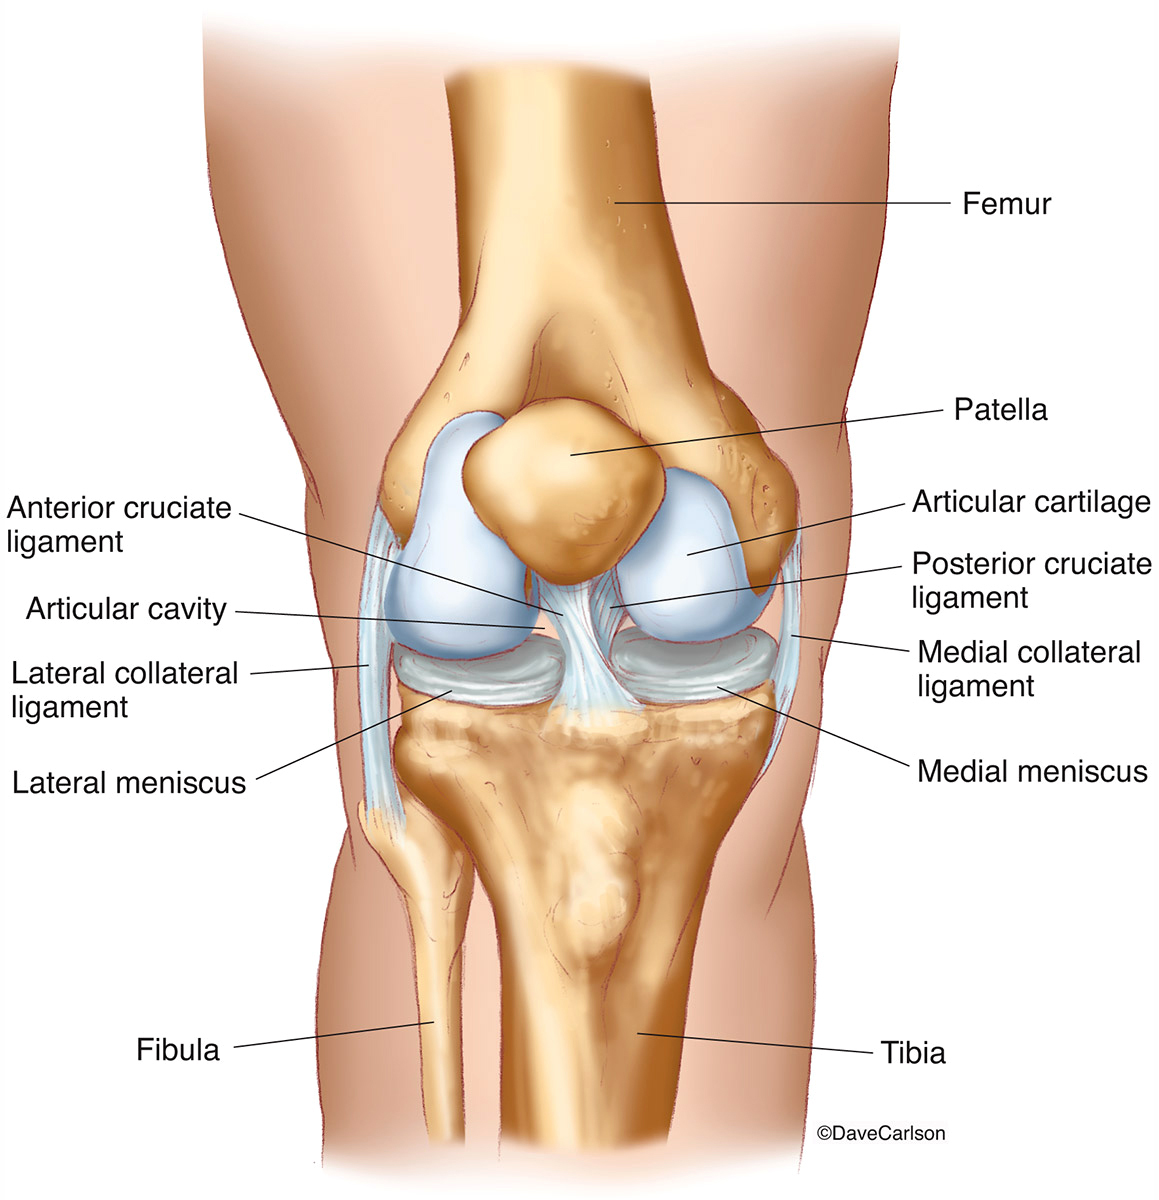 Illustration of the human knee joint bones, including ligaments and menisci (front view)